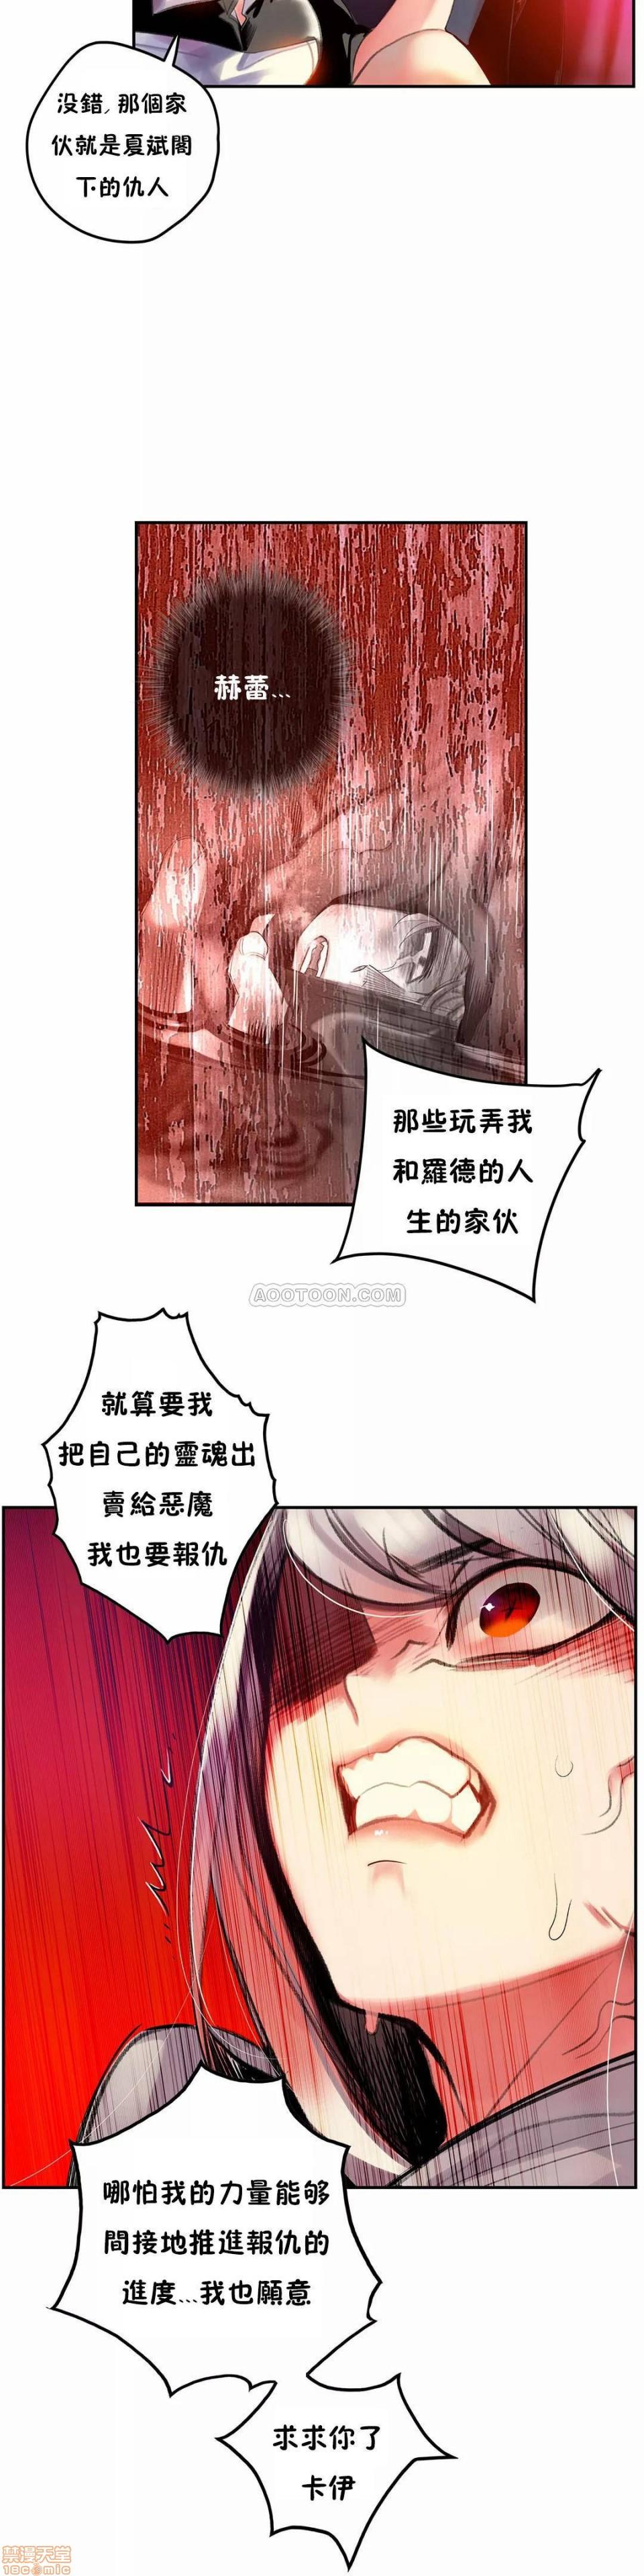 [Juder] Lilith`s Cord (第二季) Ch.77-93 end [Chinese] 40